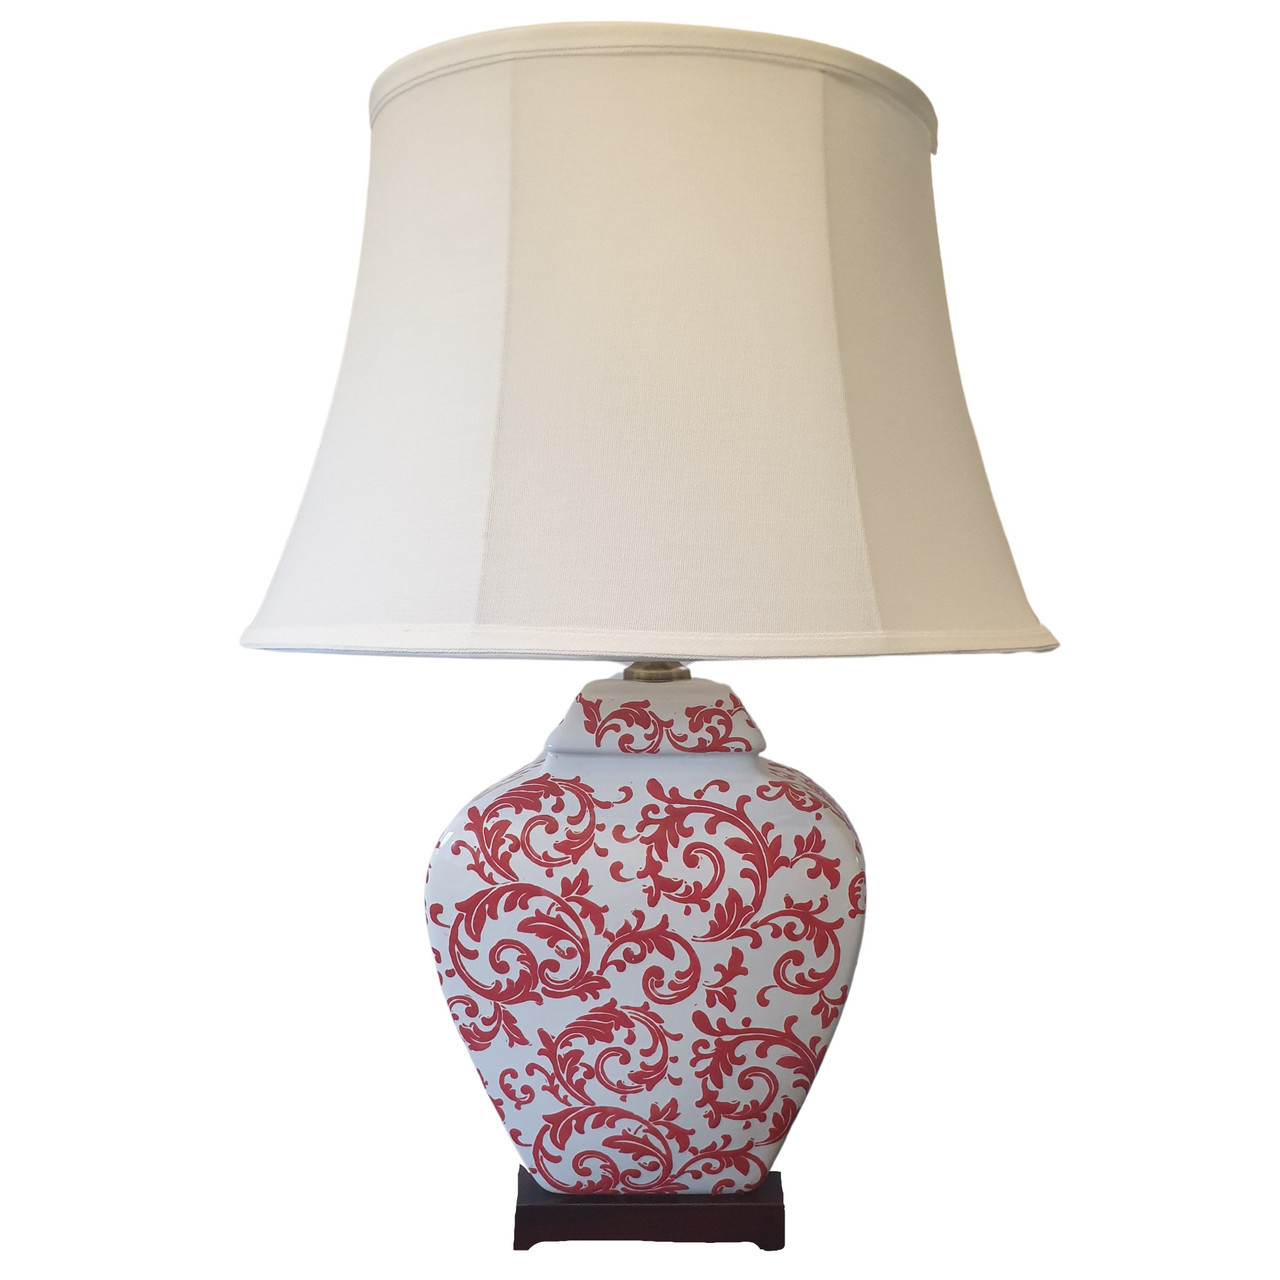 Pair of Chinese Table Lamps with Shades - Red Phoenix Feather Pattern (DS)